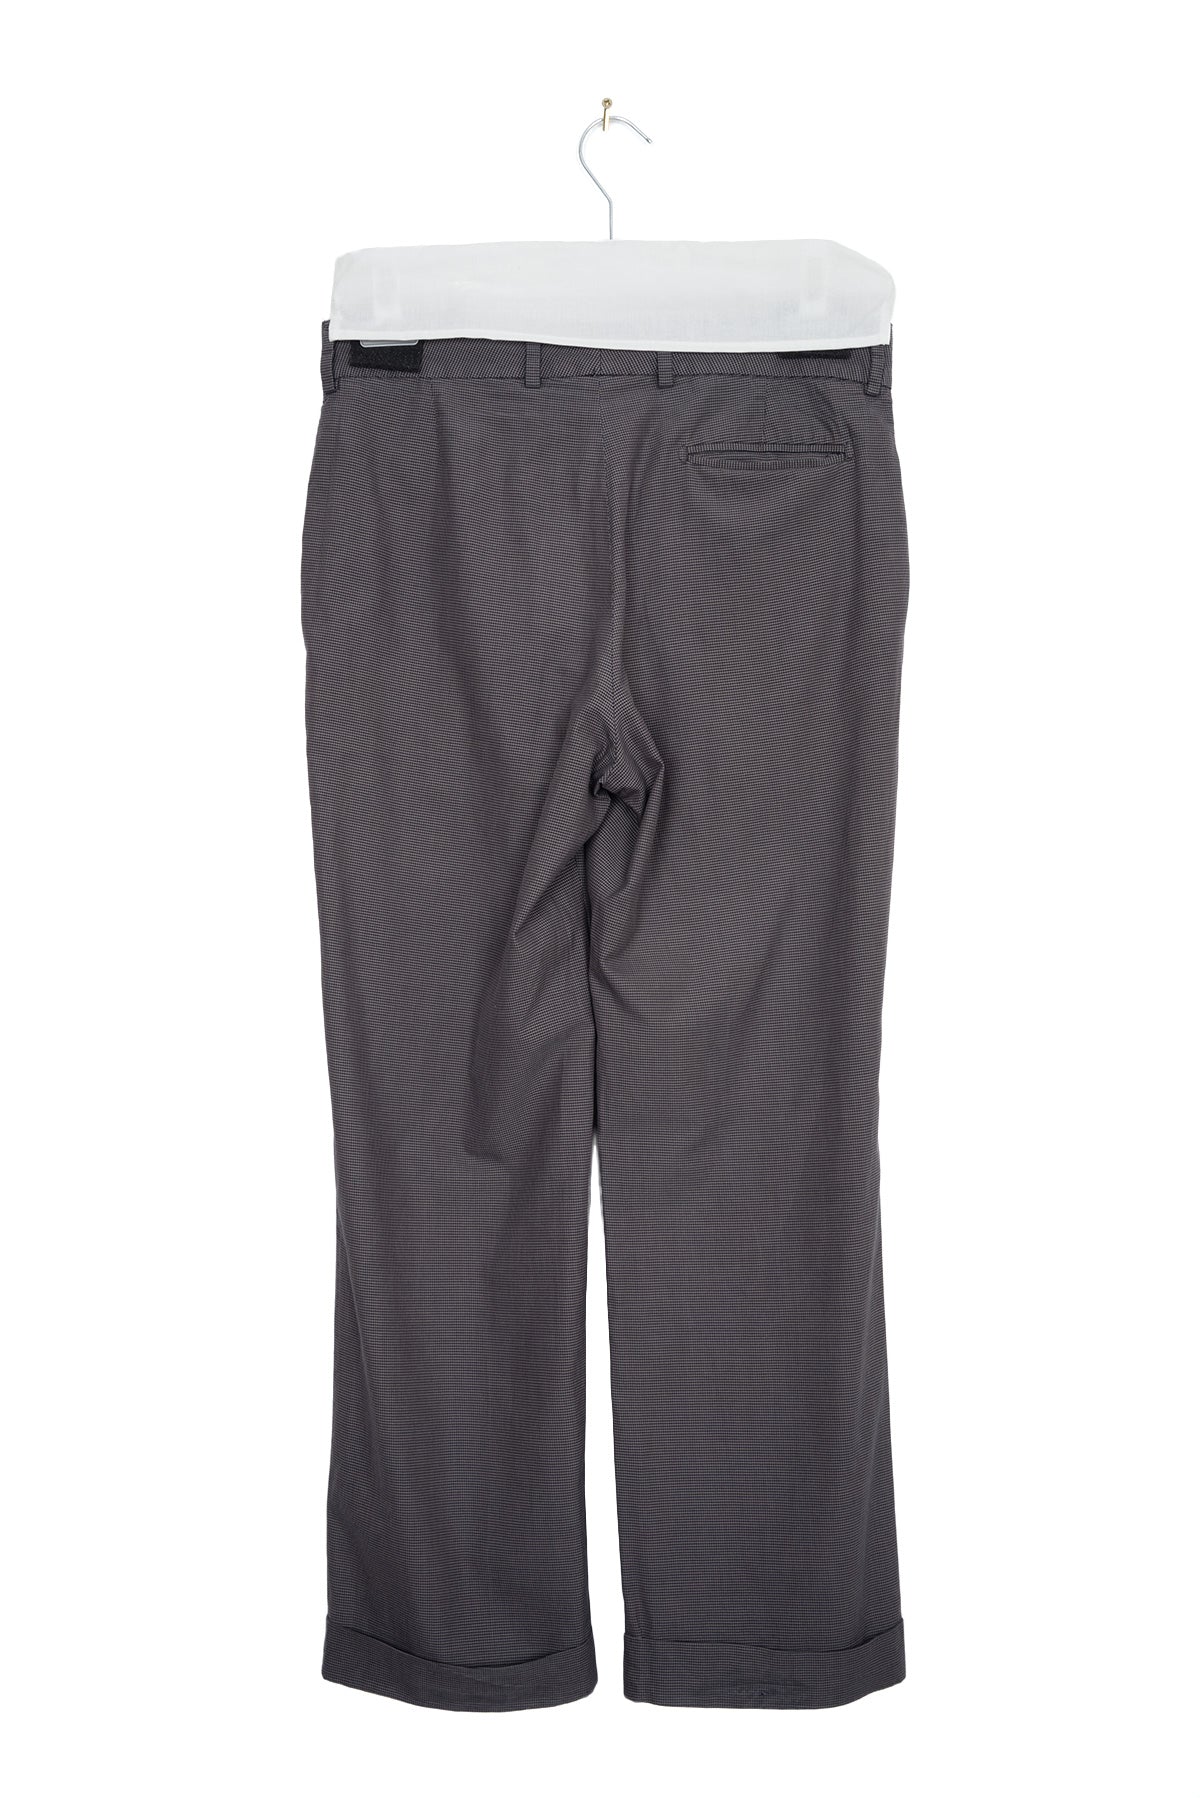 2002 S/S ANATOMIC PANTS IN WASHED COTTON